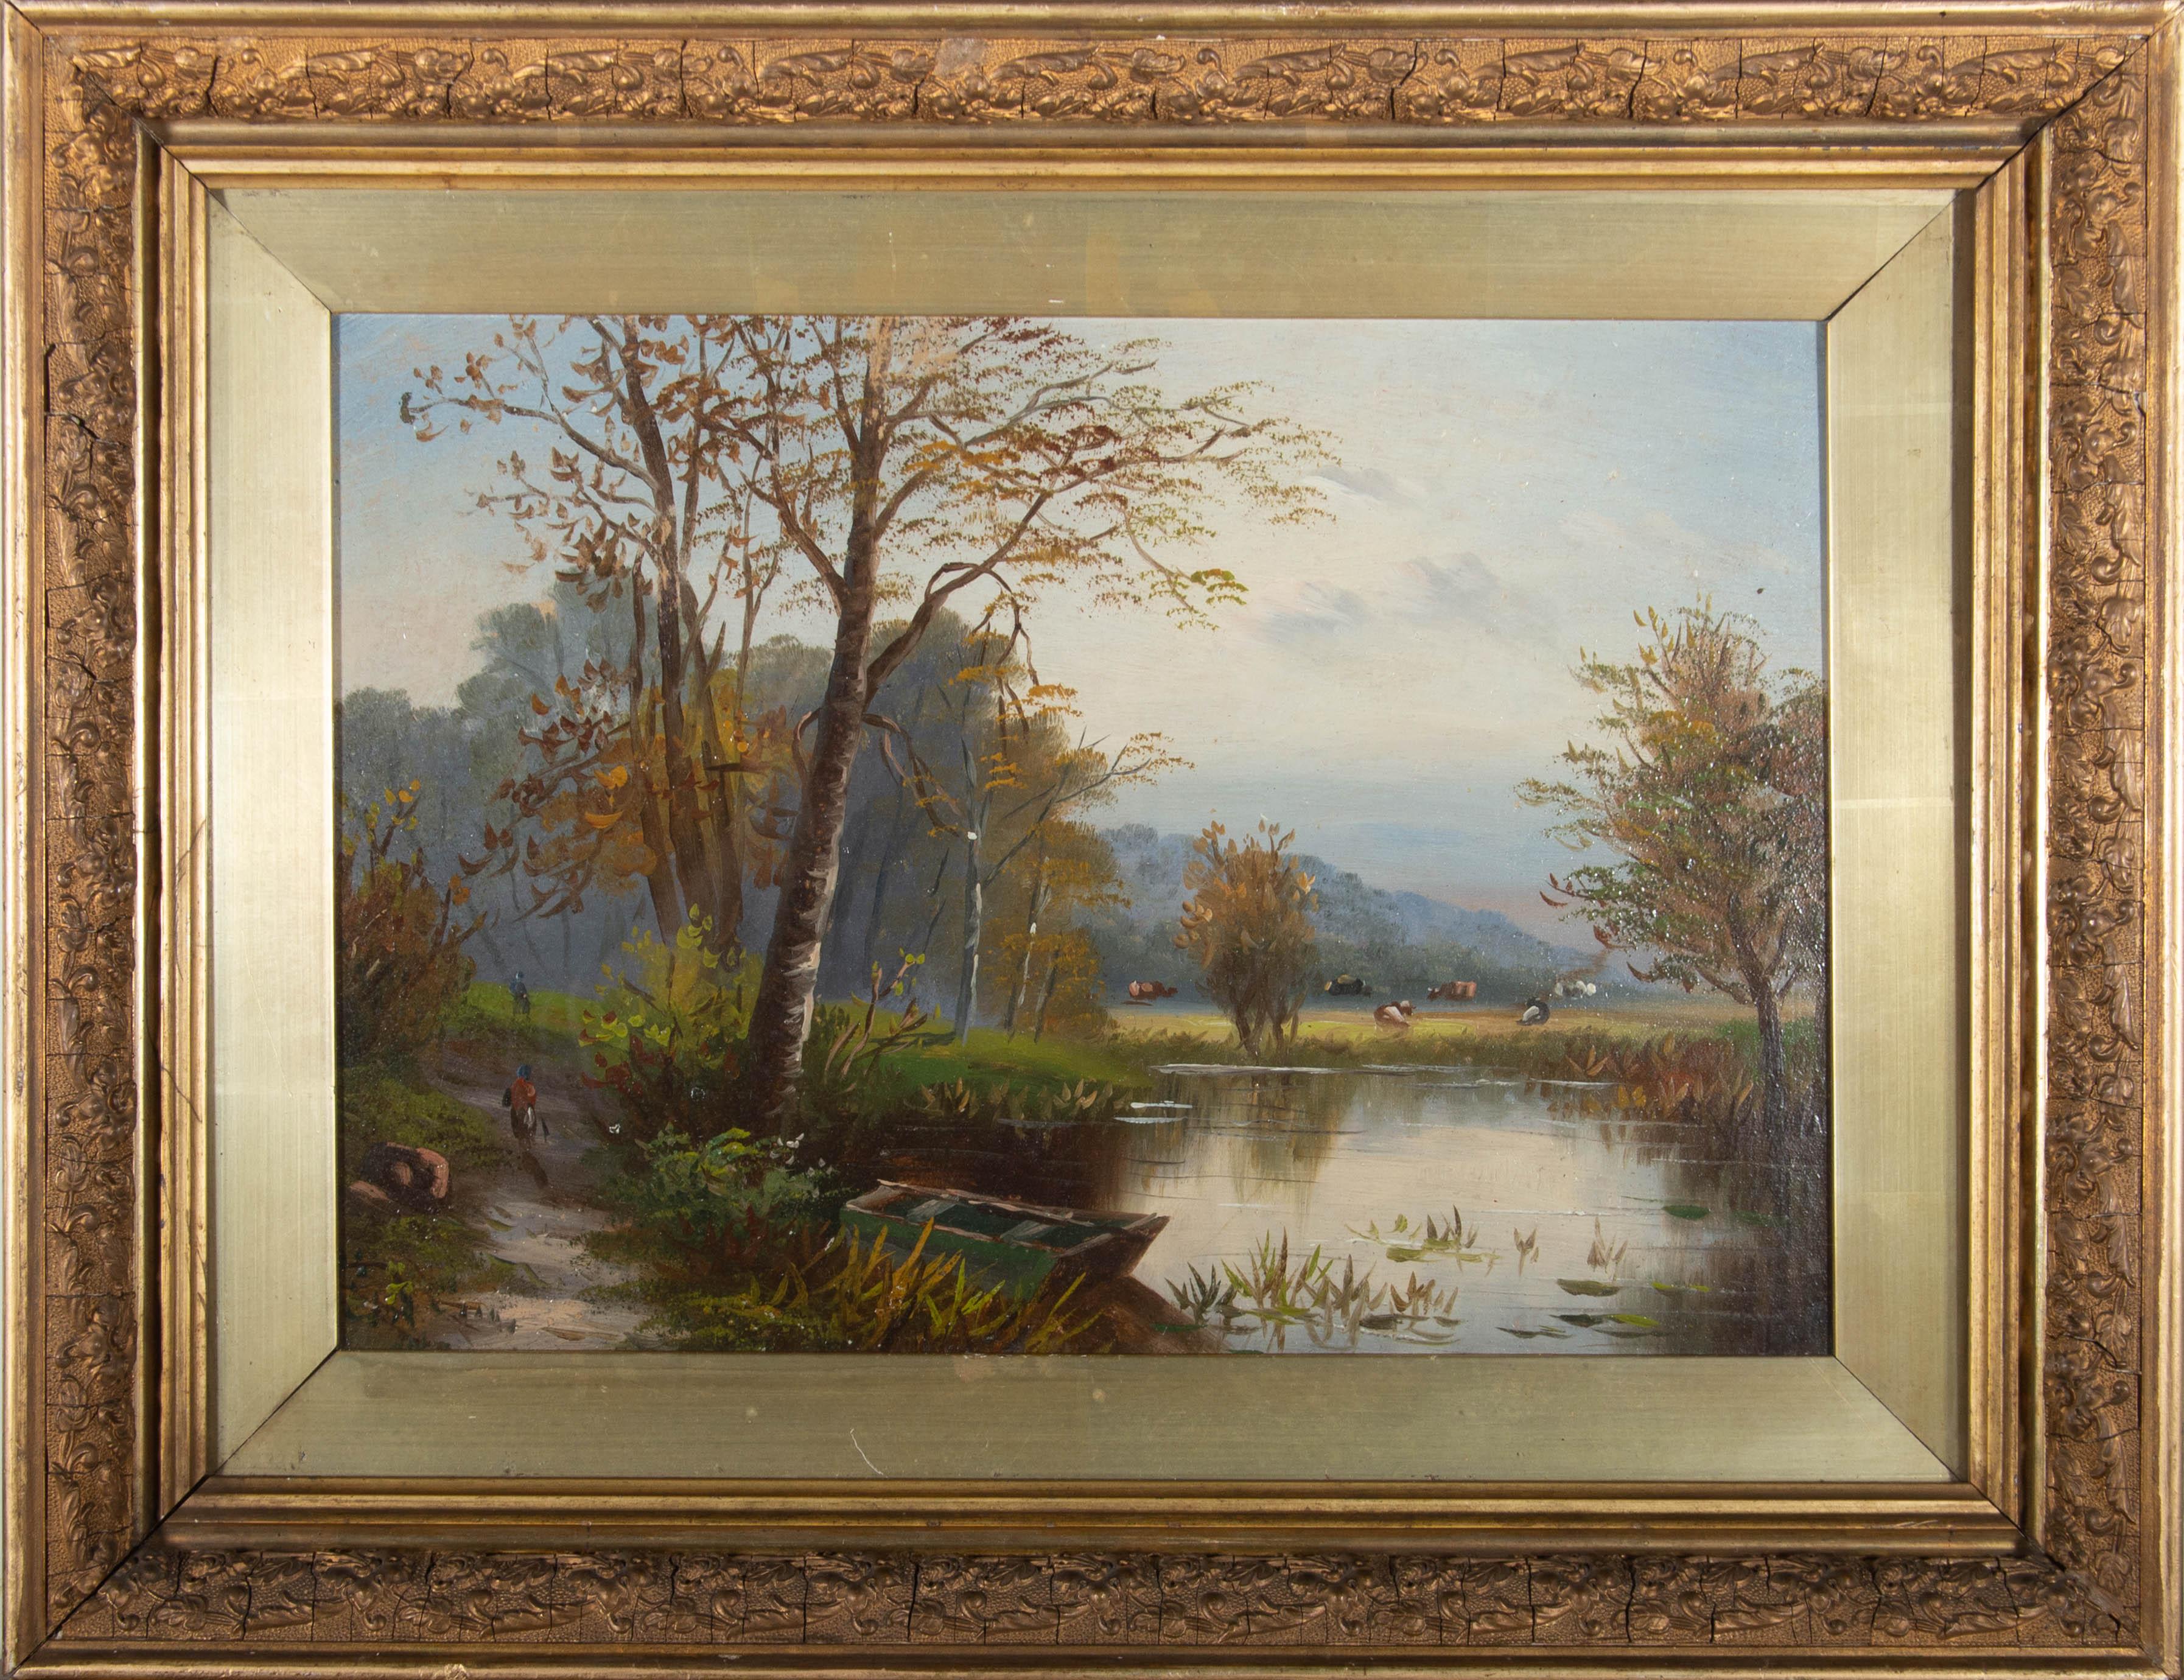 Early 20th Century Oil - River Landscape - Brown Landscape Painting by Unknown